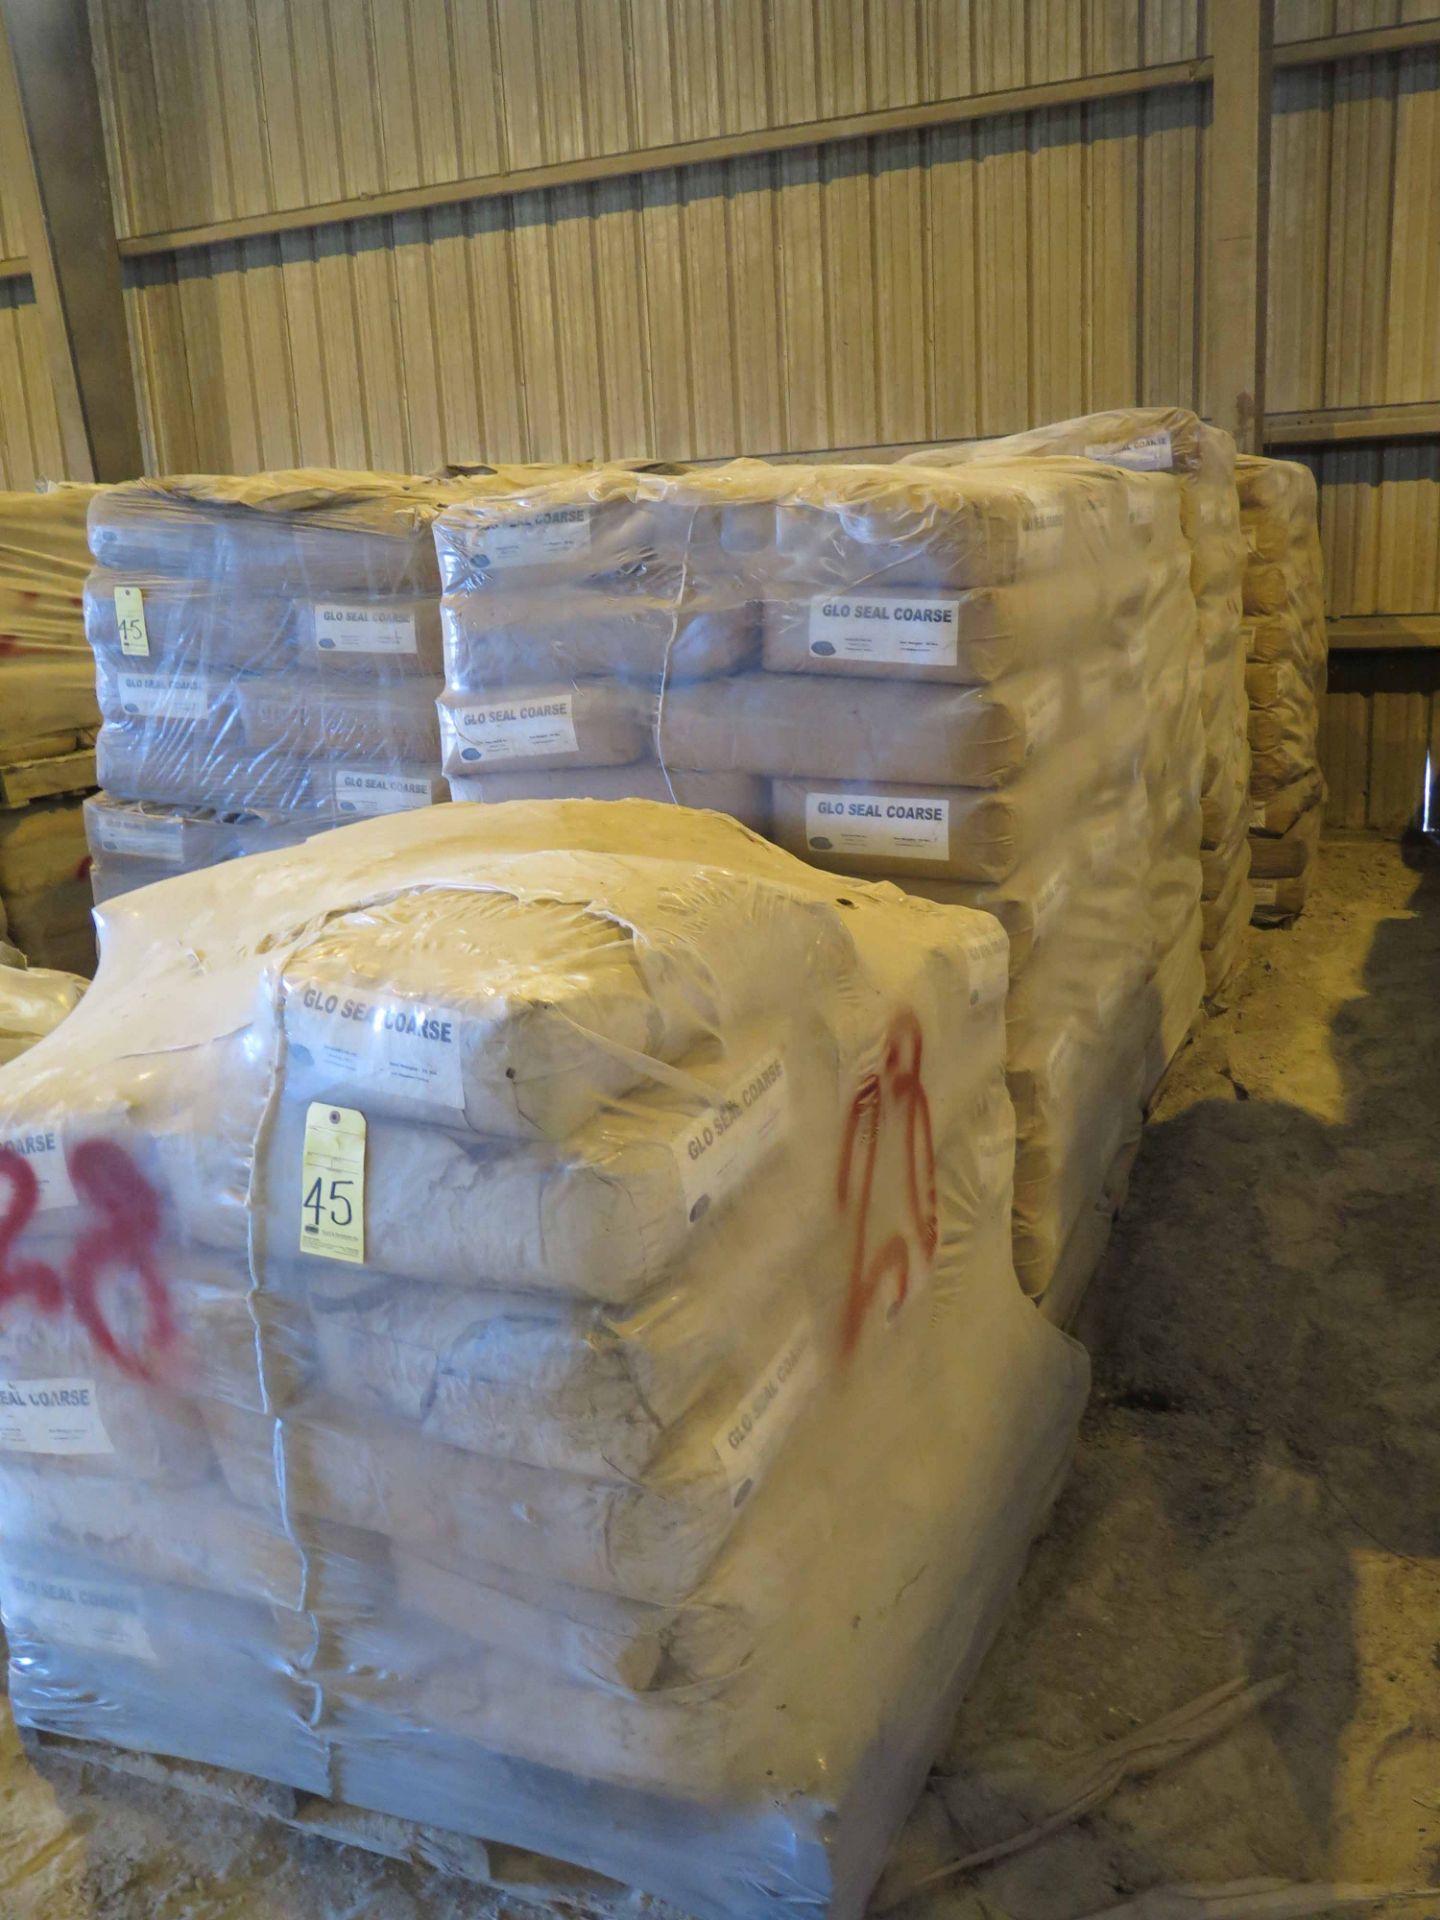 LOT OF GLO SEAL COARSE (approx. 488 bags) (Location #1: 374 Walter White Road, Trinity, TX 75862)